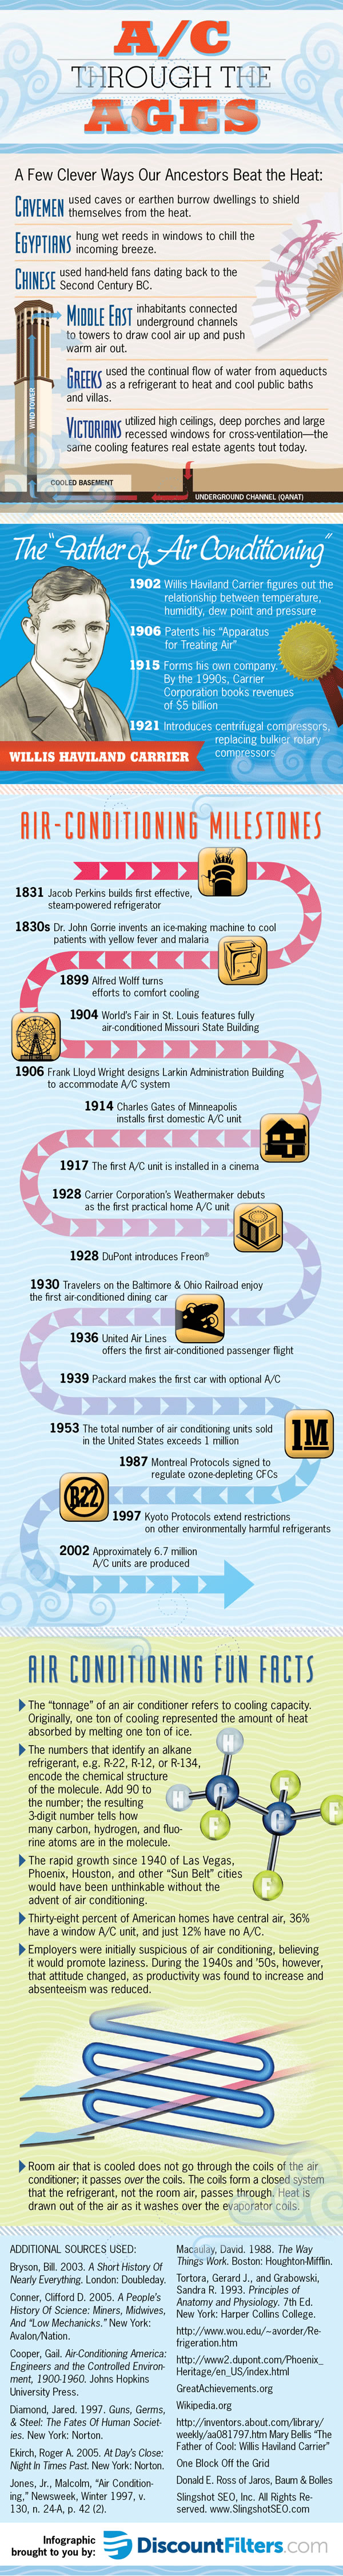 Air Conditioning History